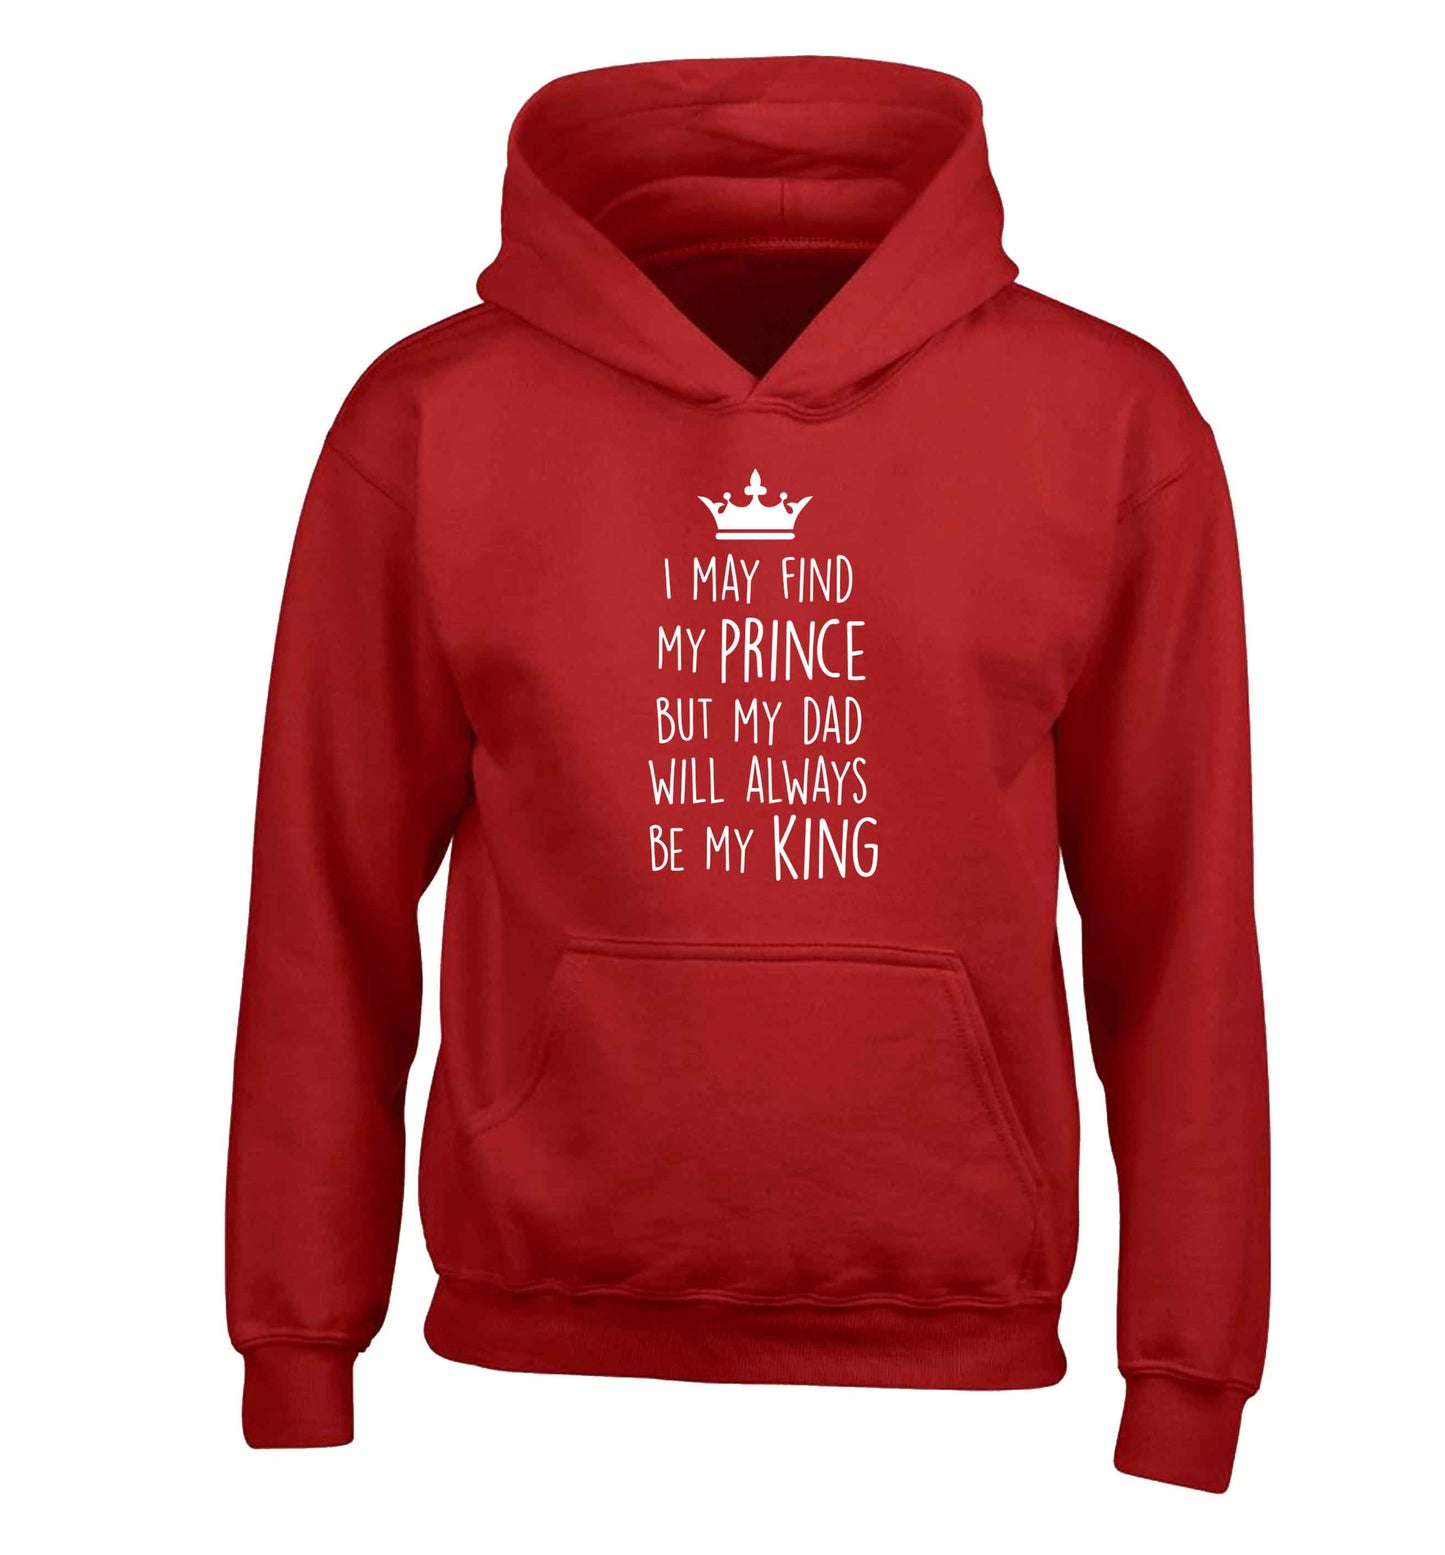 I may find my prince but my dad will always be my king children's red hoodie 12-13 Years